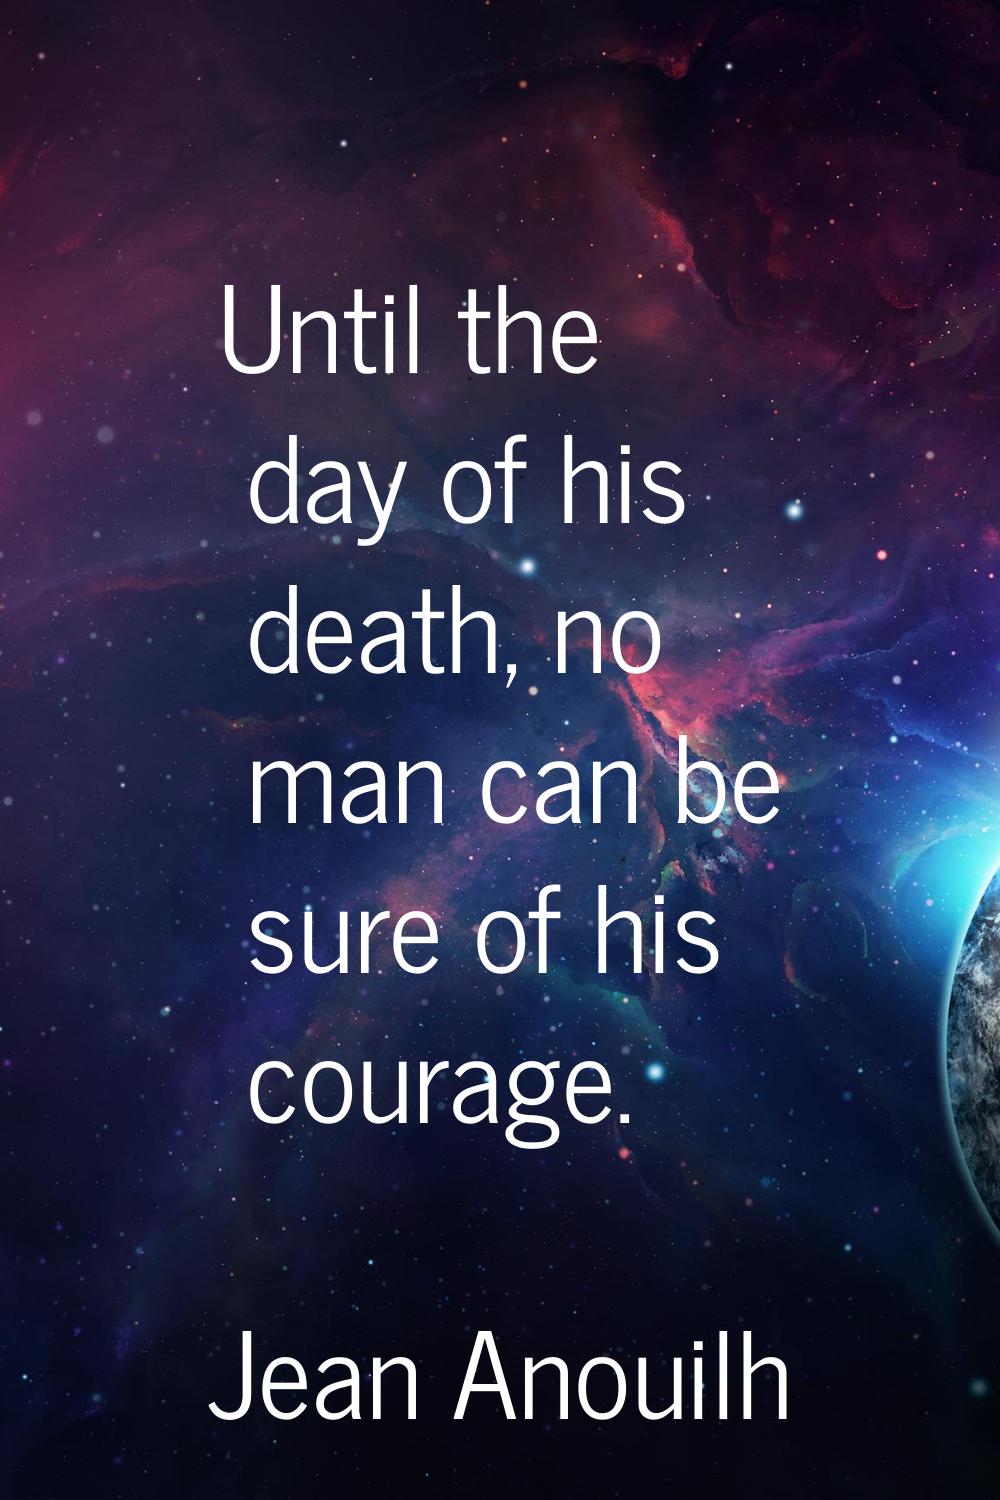 Until the day of his death, no man can be sure of his courage.